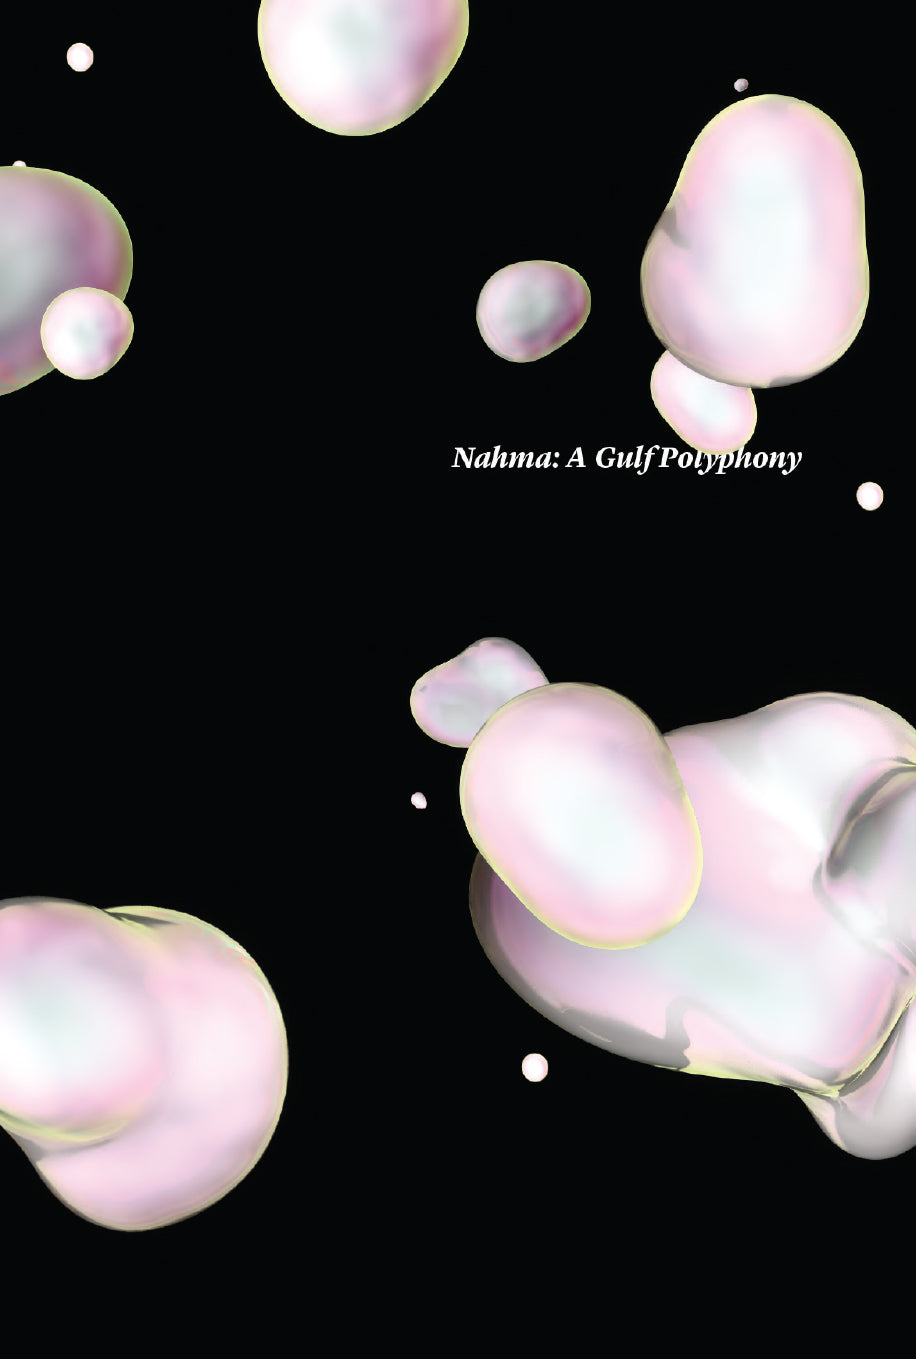 Black cover with amorphous pastel shapes with the title of the book in the mid-upper right.